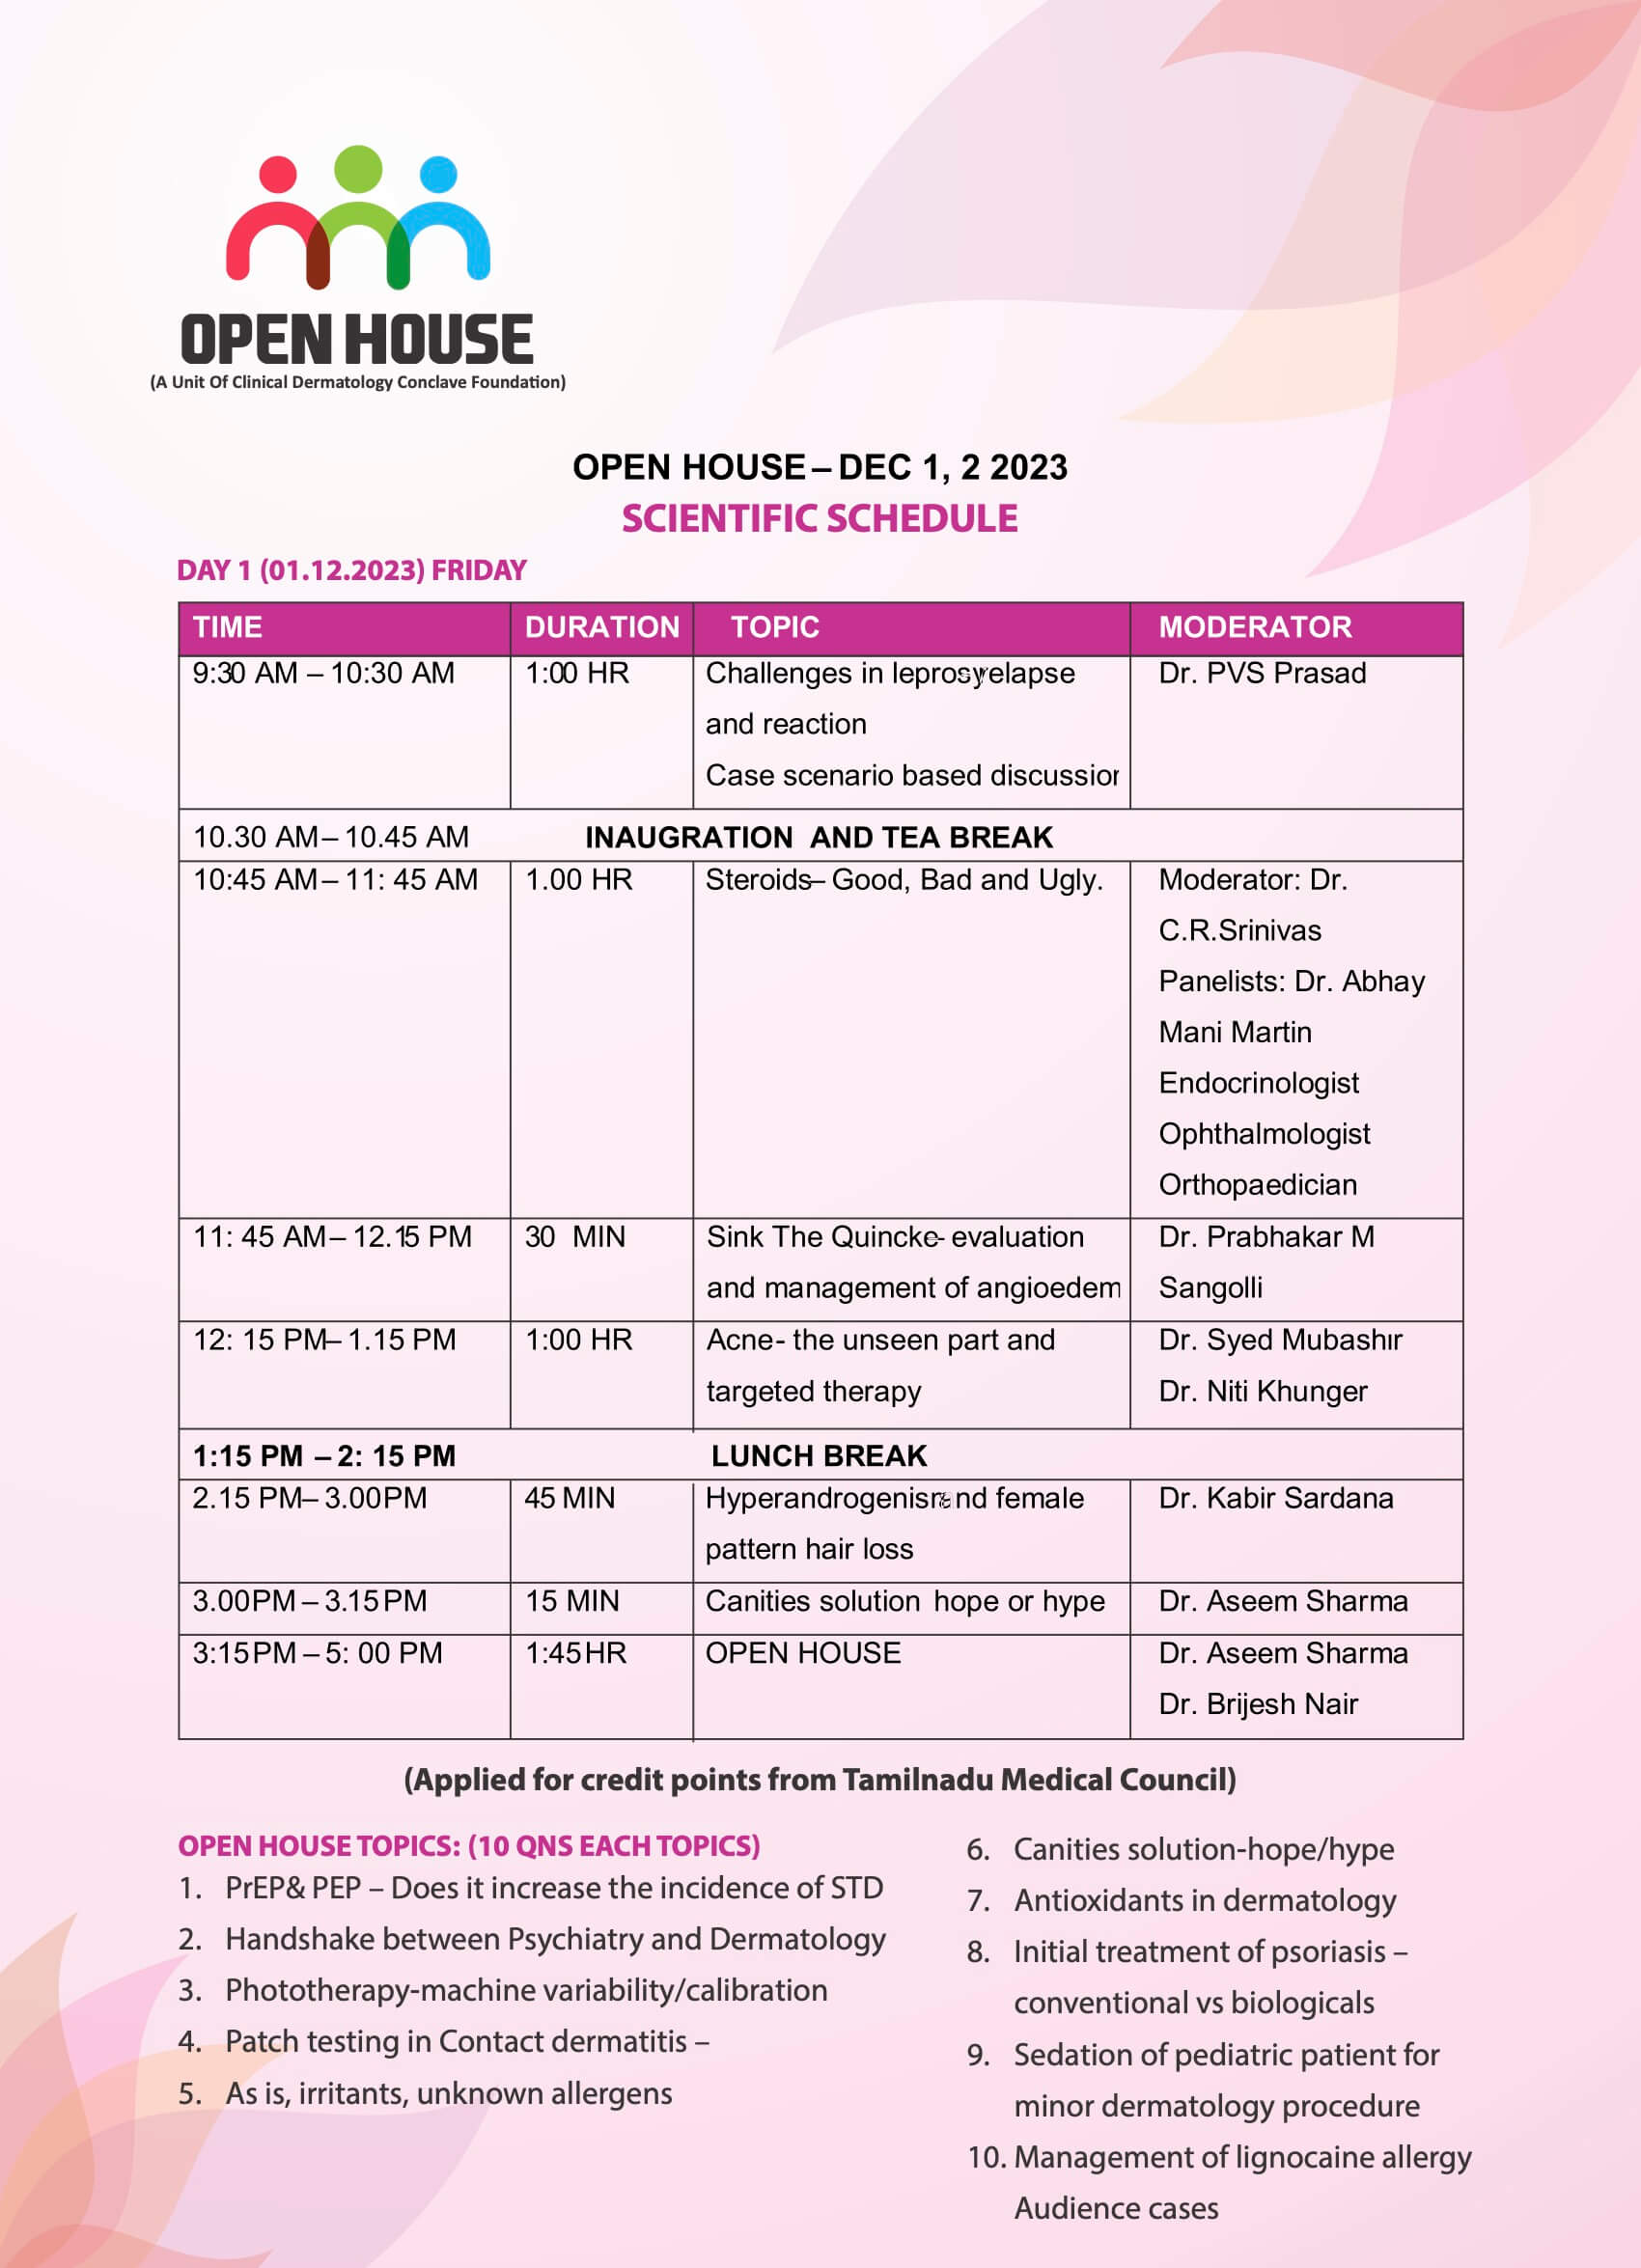 OPEN HOUSE Conclave On Clinical Dermatology